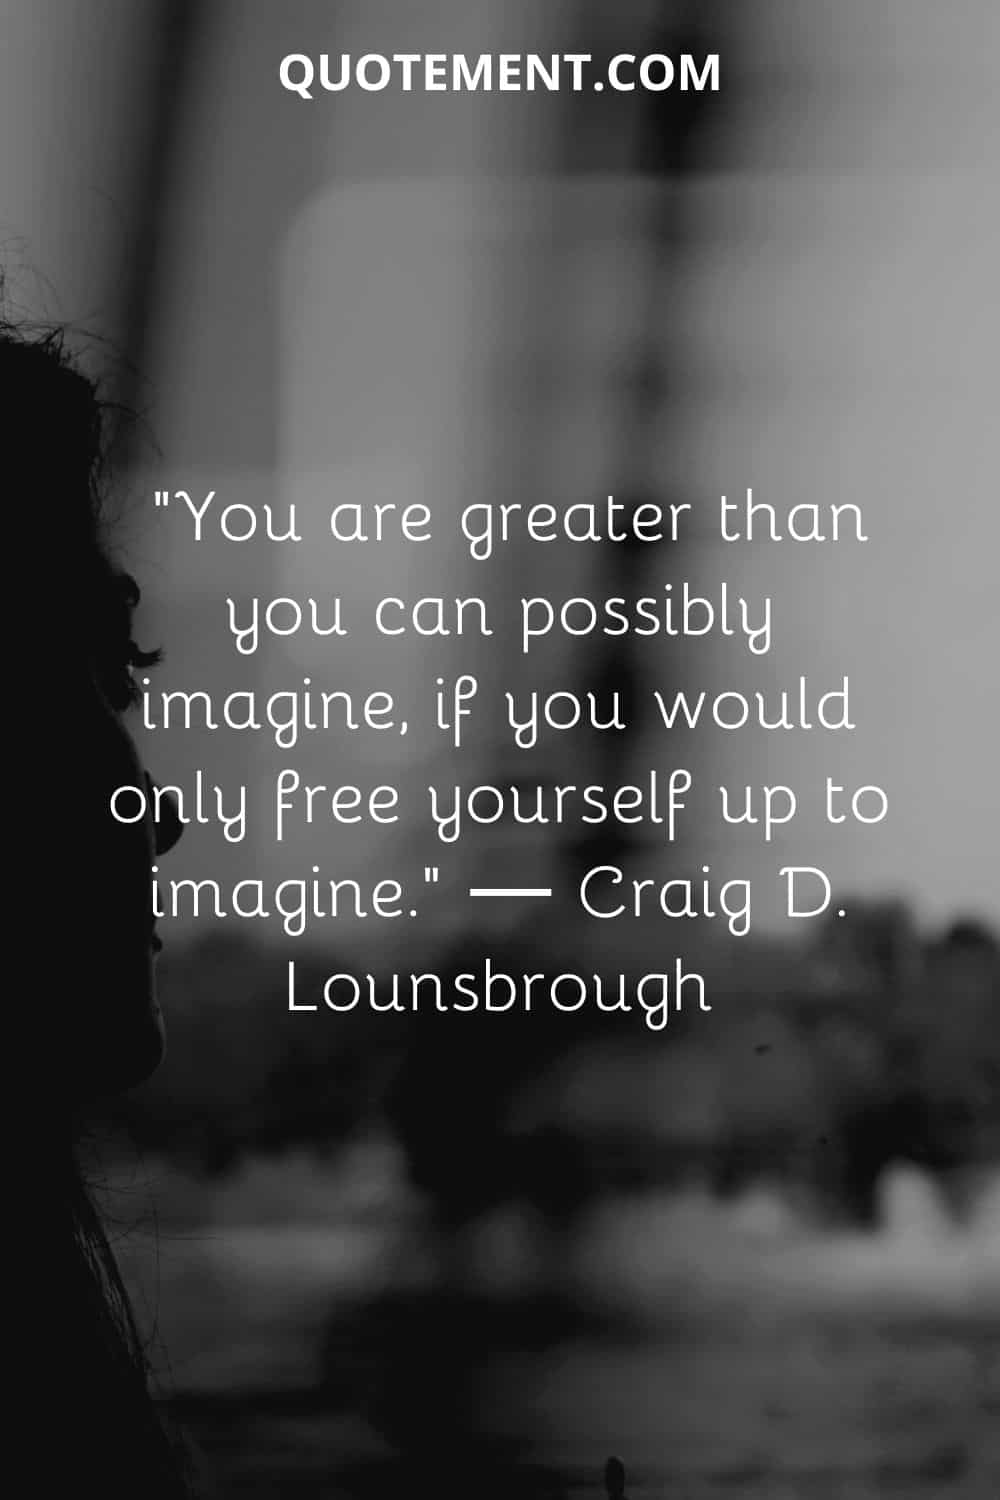 You are greater than you can possibly imagine